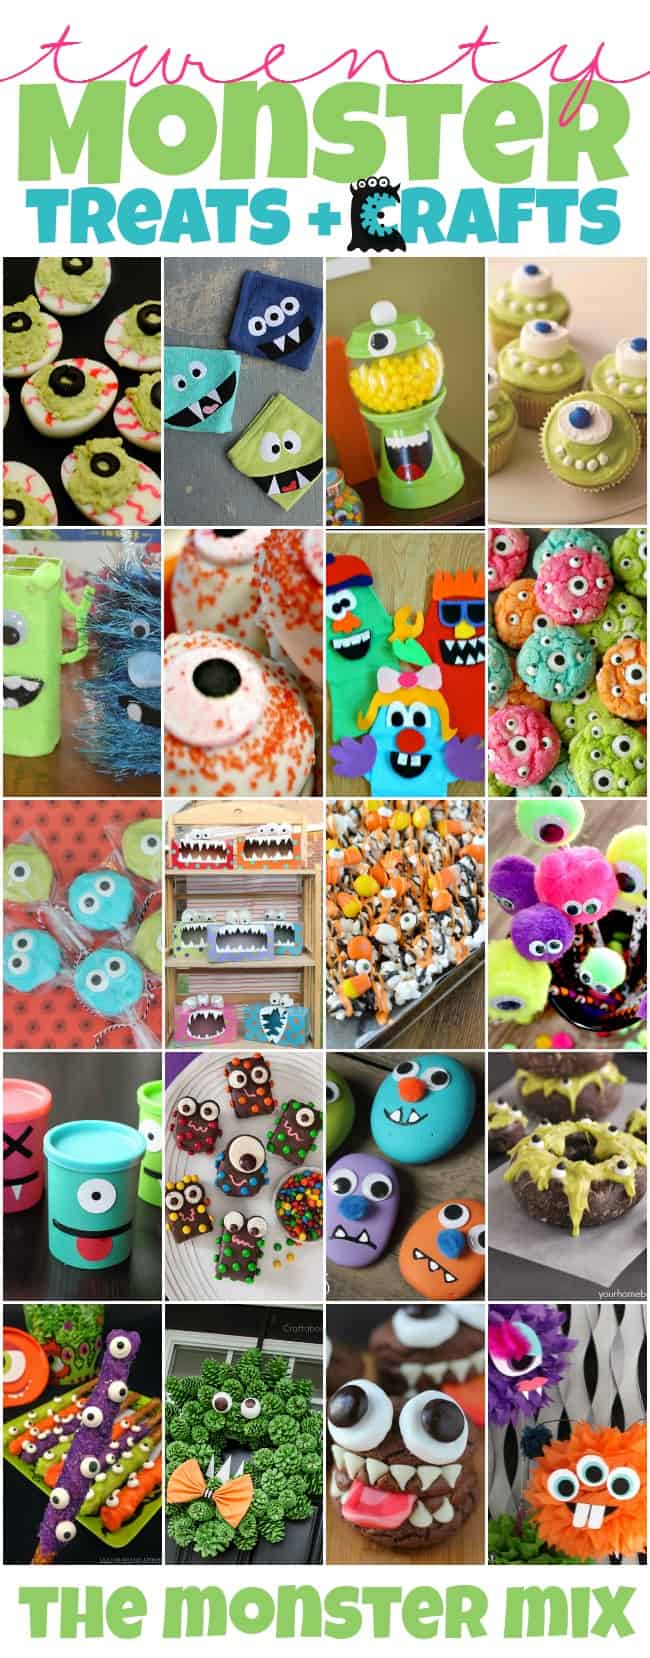 20 Monster Treats and Crafts